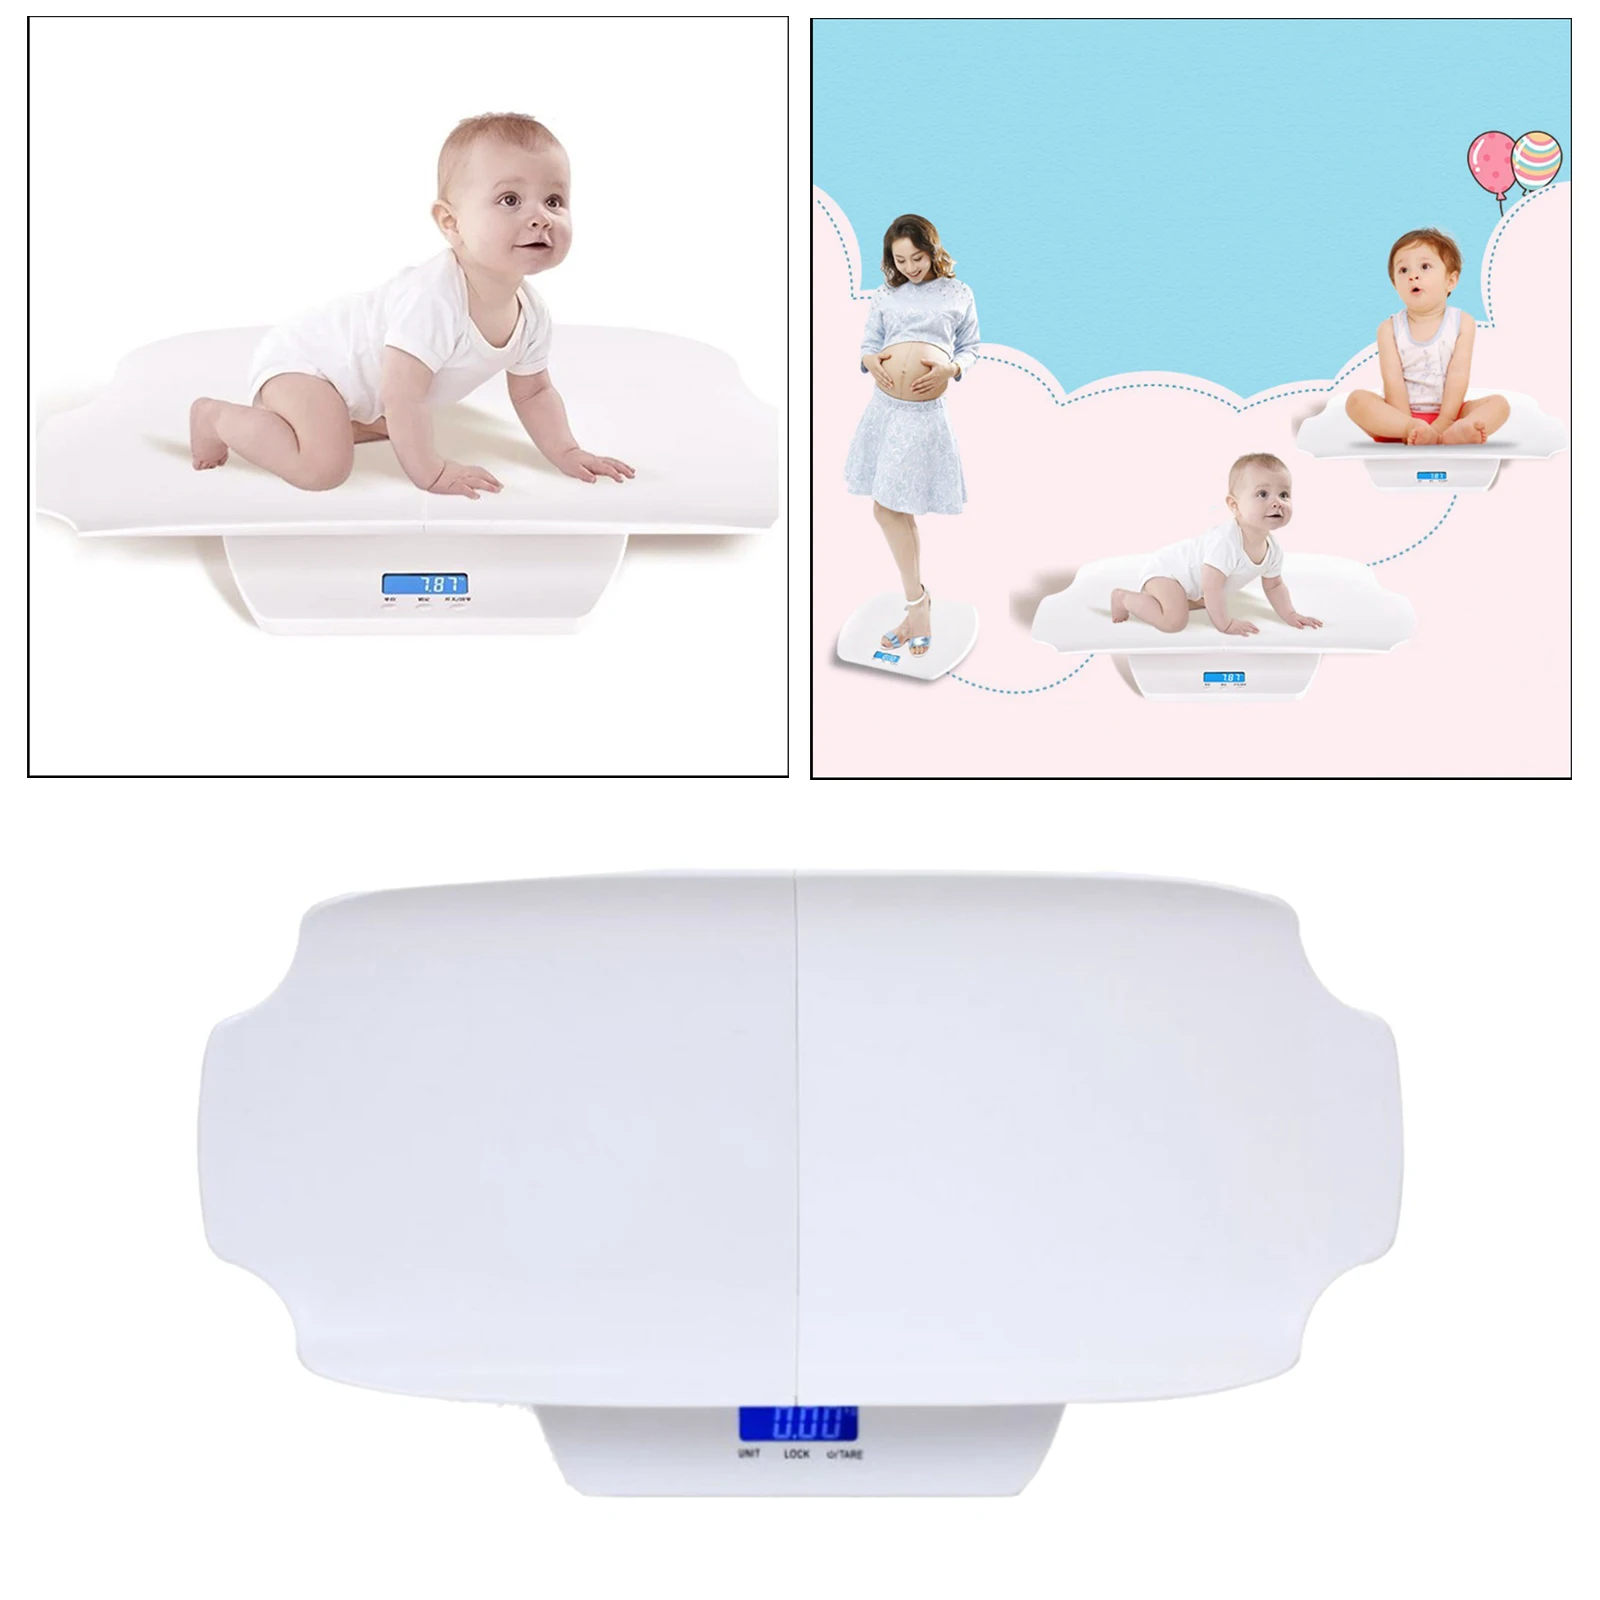 Accurate Electronic Baby Scale Infant Scales Holding Function LCD Display